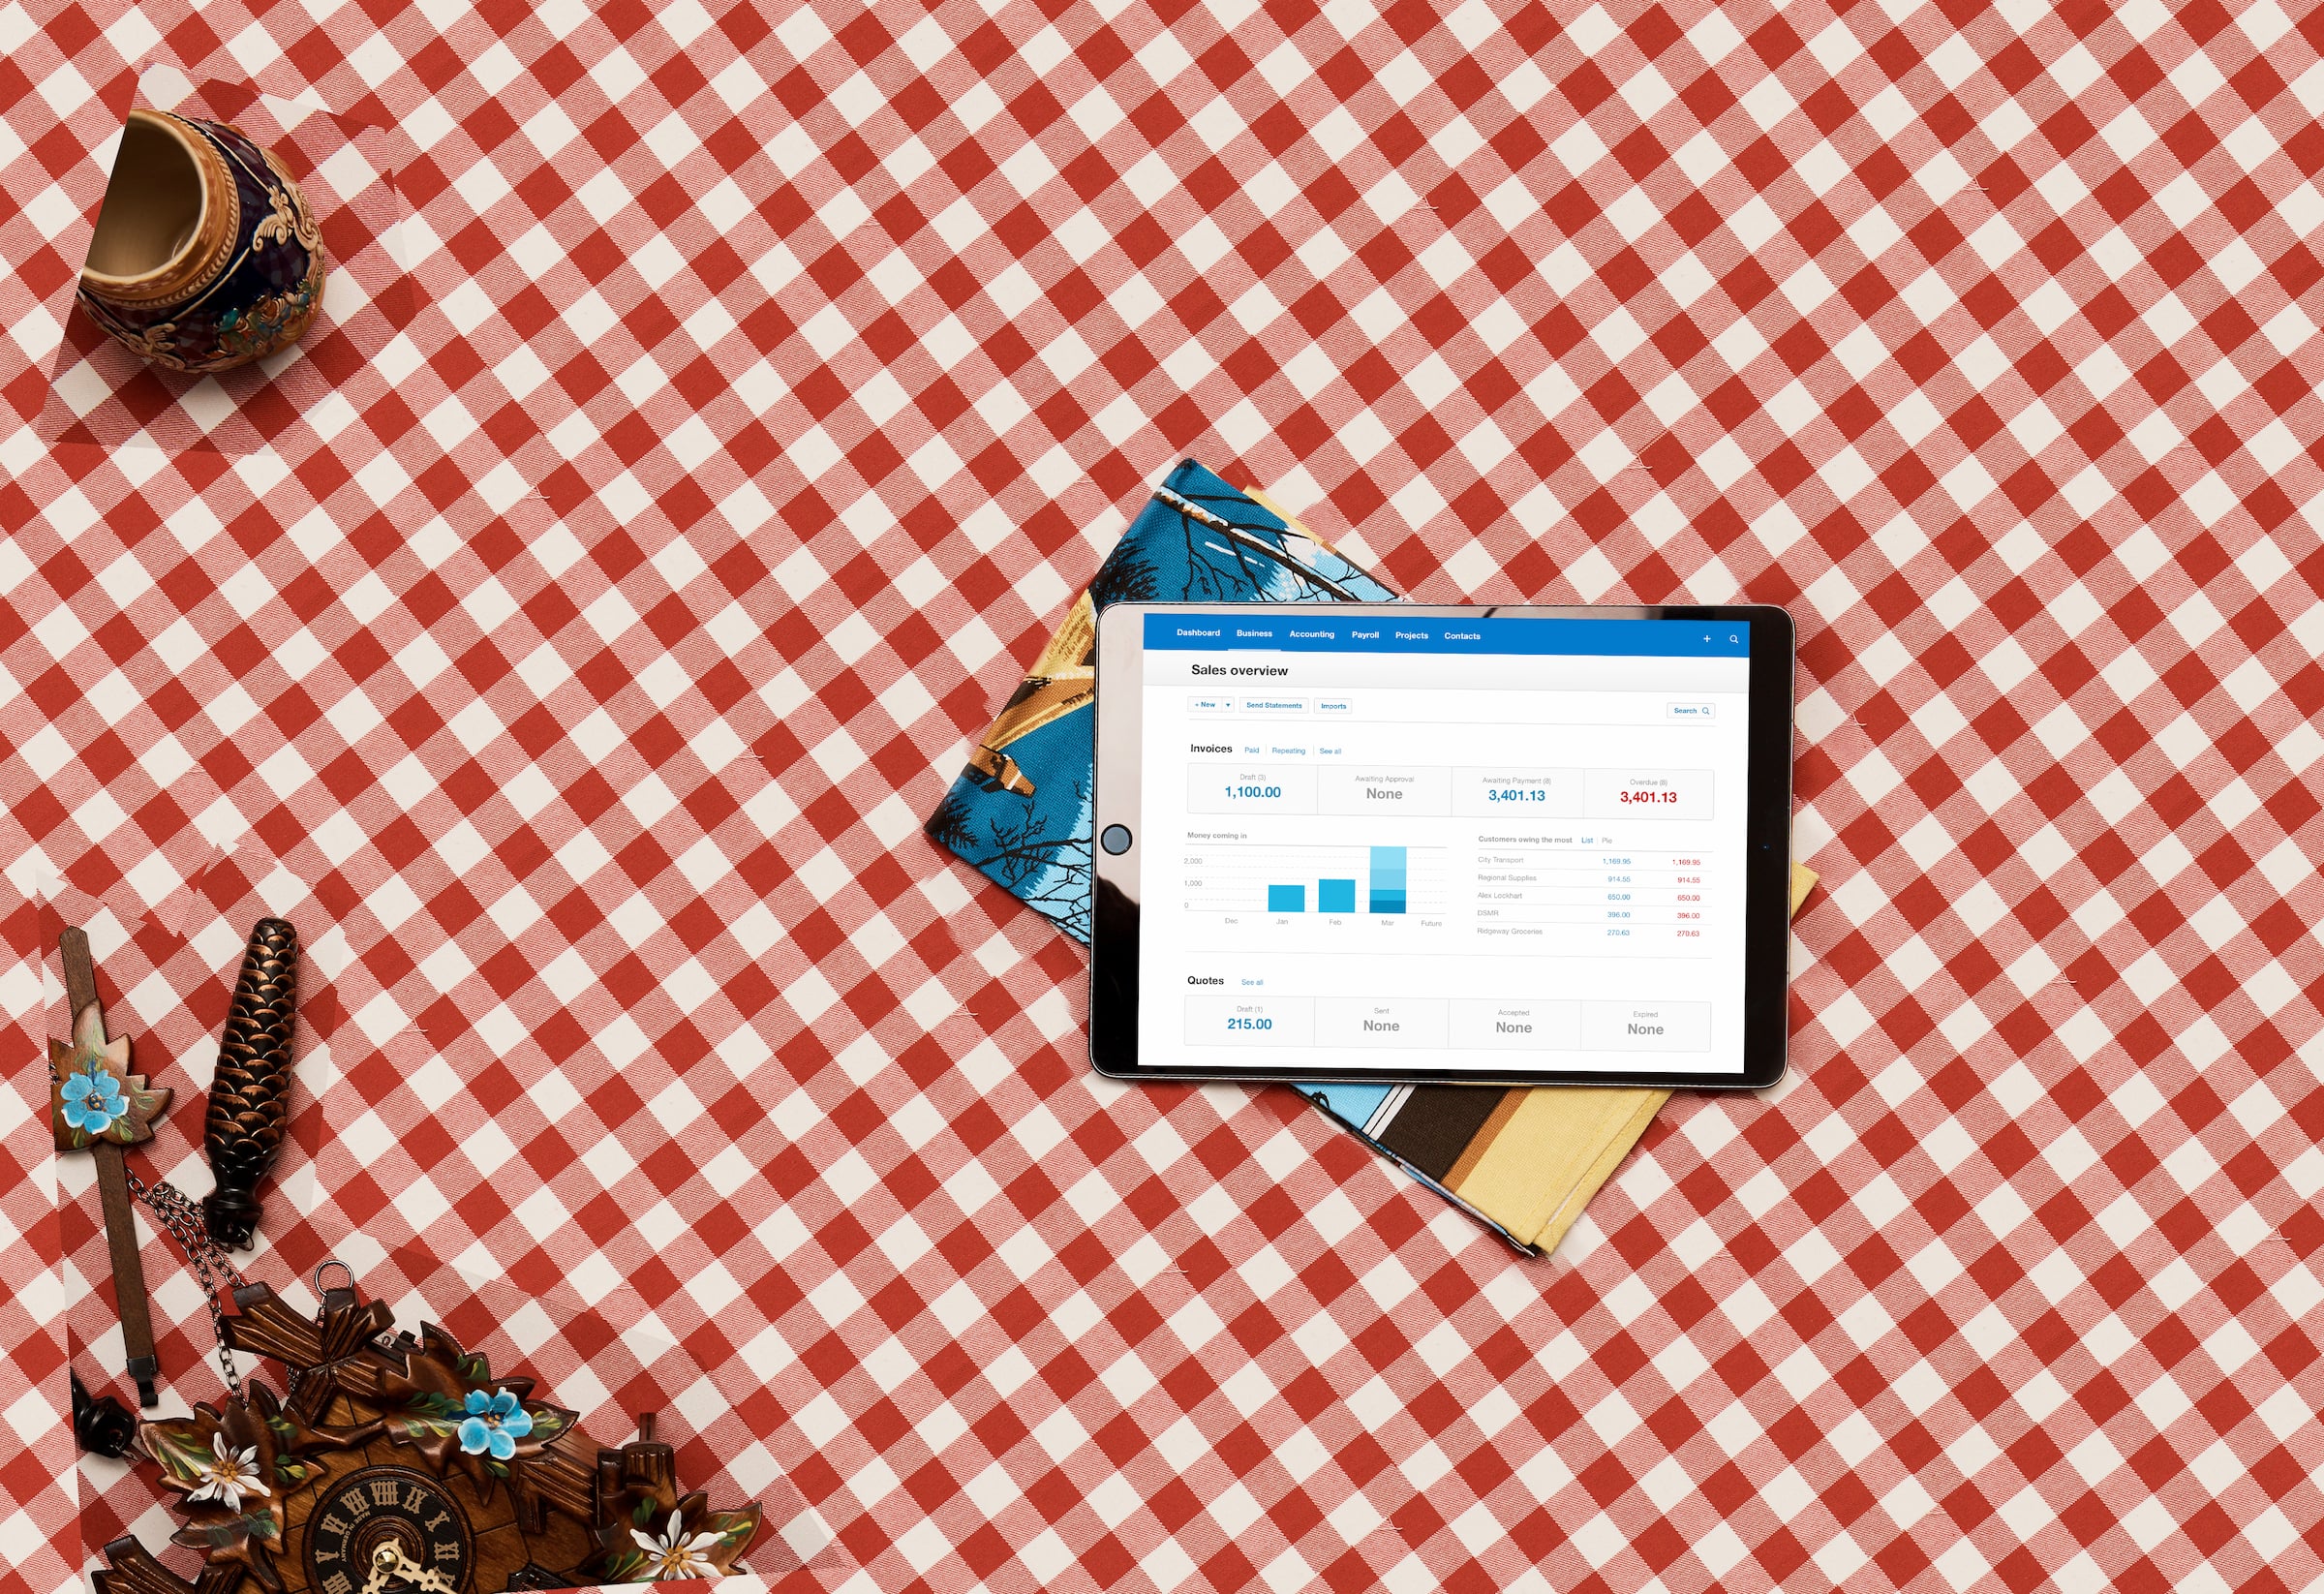 A Xero sales overview screen is open on an ipad that’s lying on a tablecloth checkered red and white.